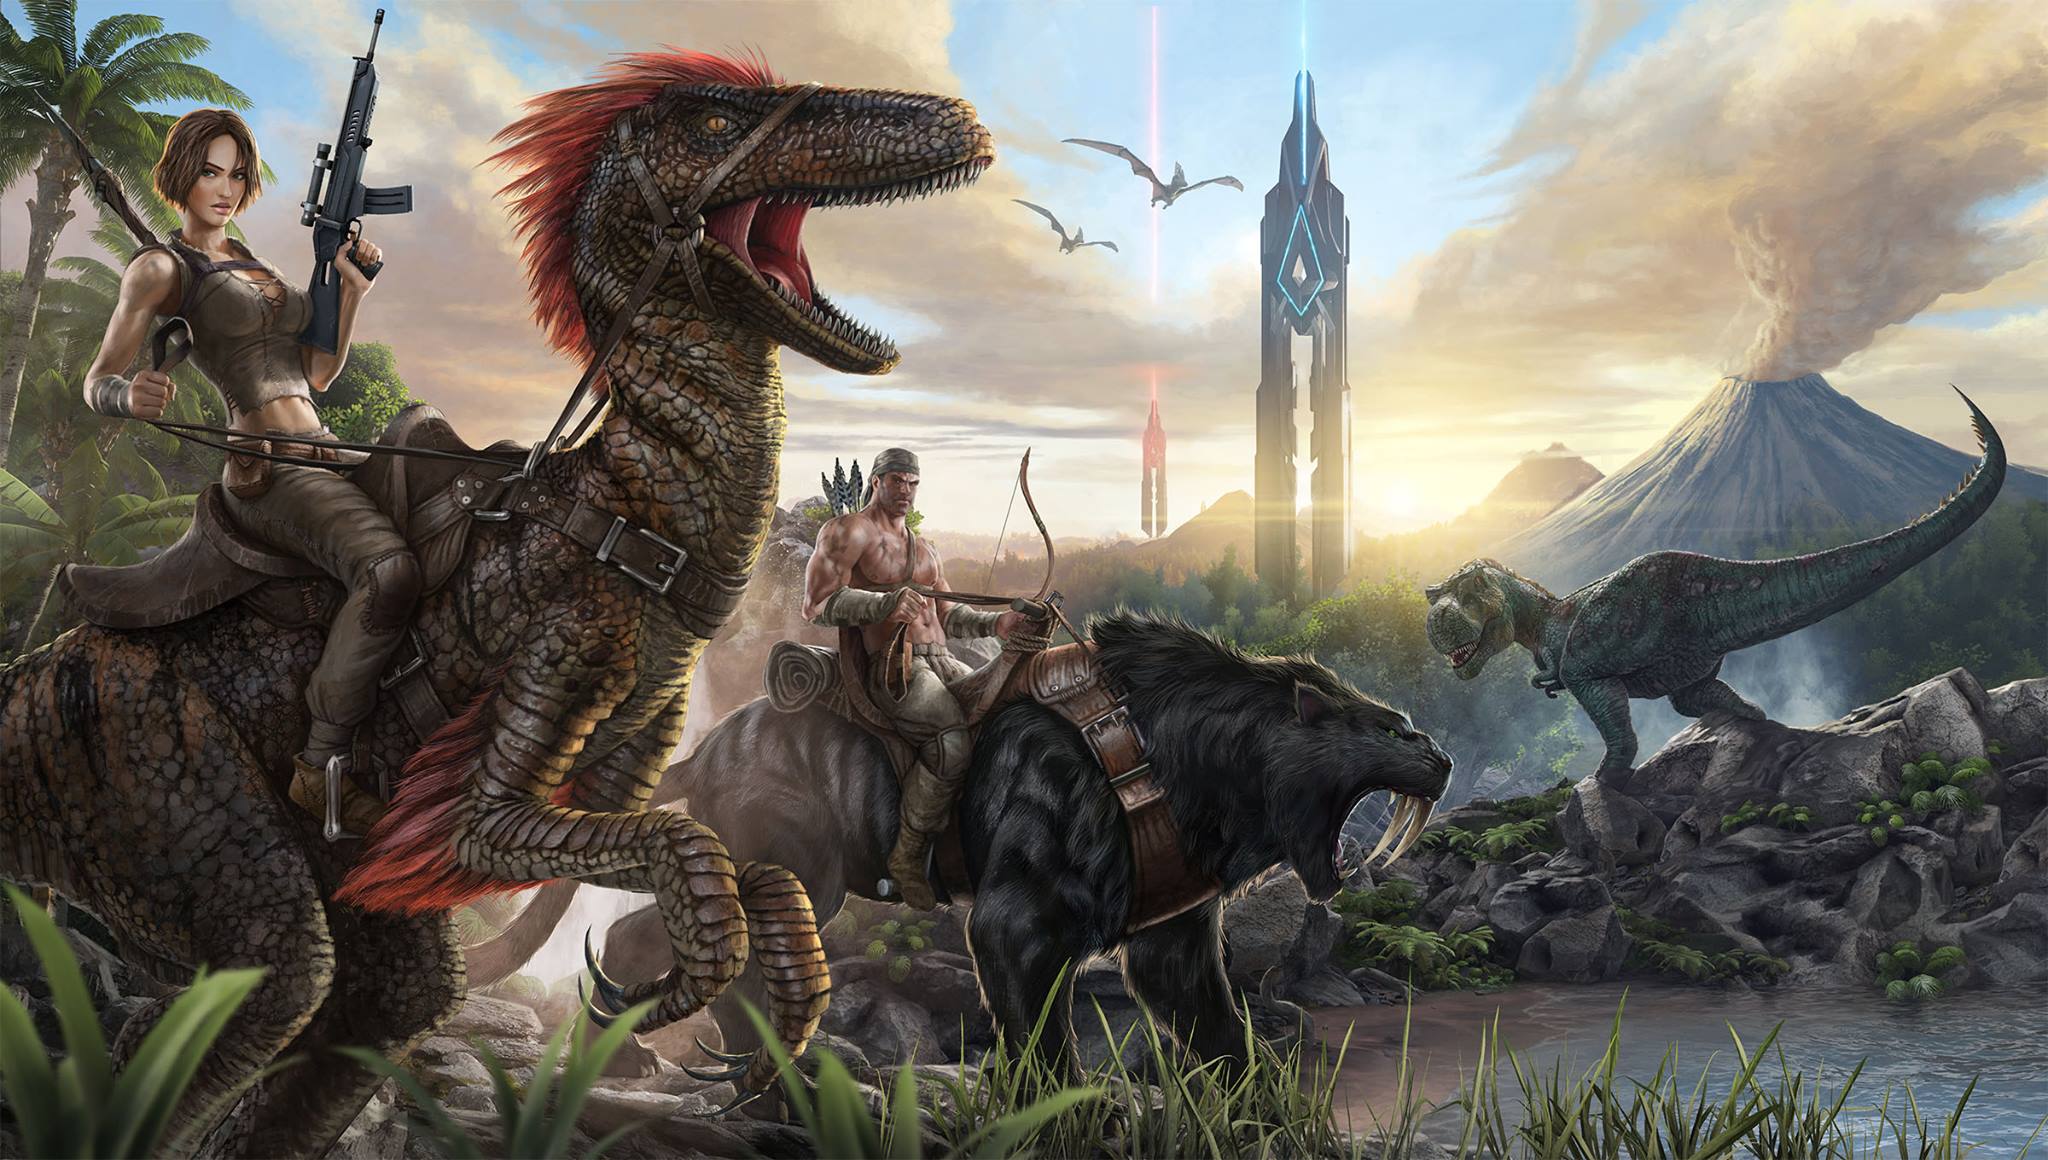 “ARK: Survival Evolved” Is Bringing Dinosaurs Back - Along with ... Other Things